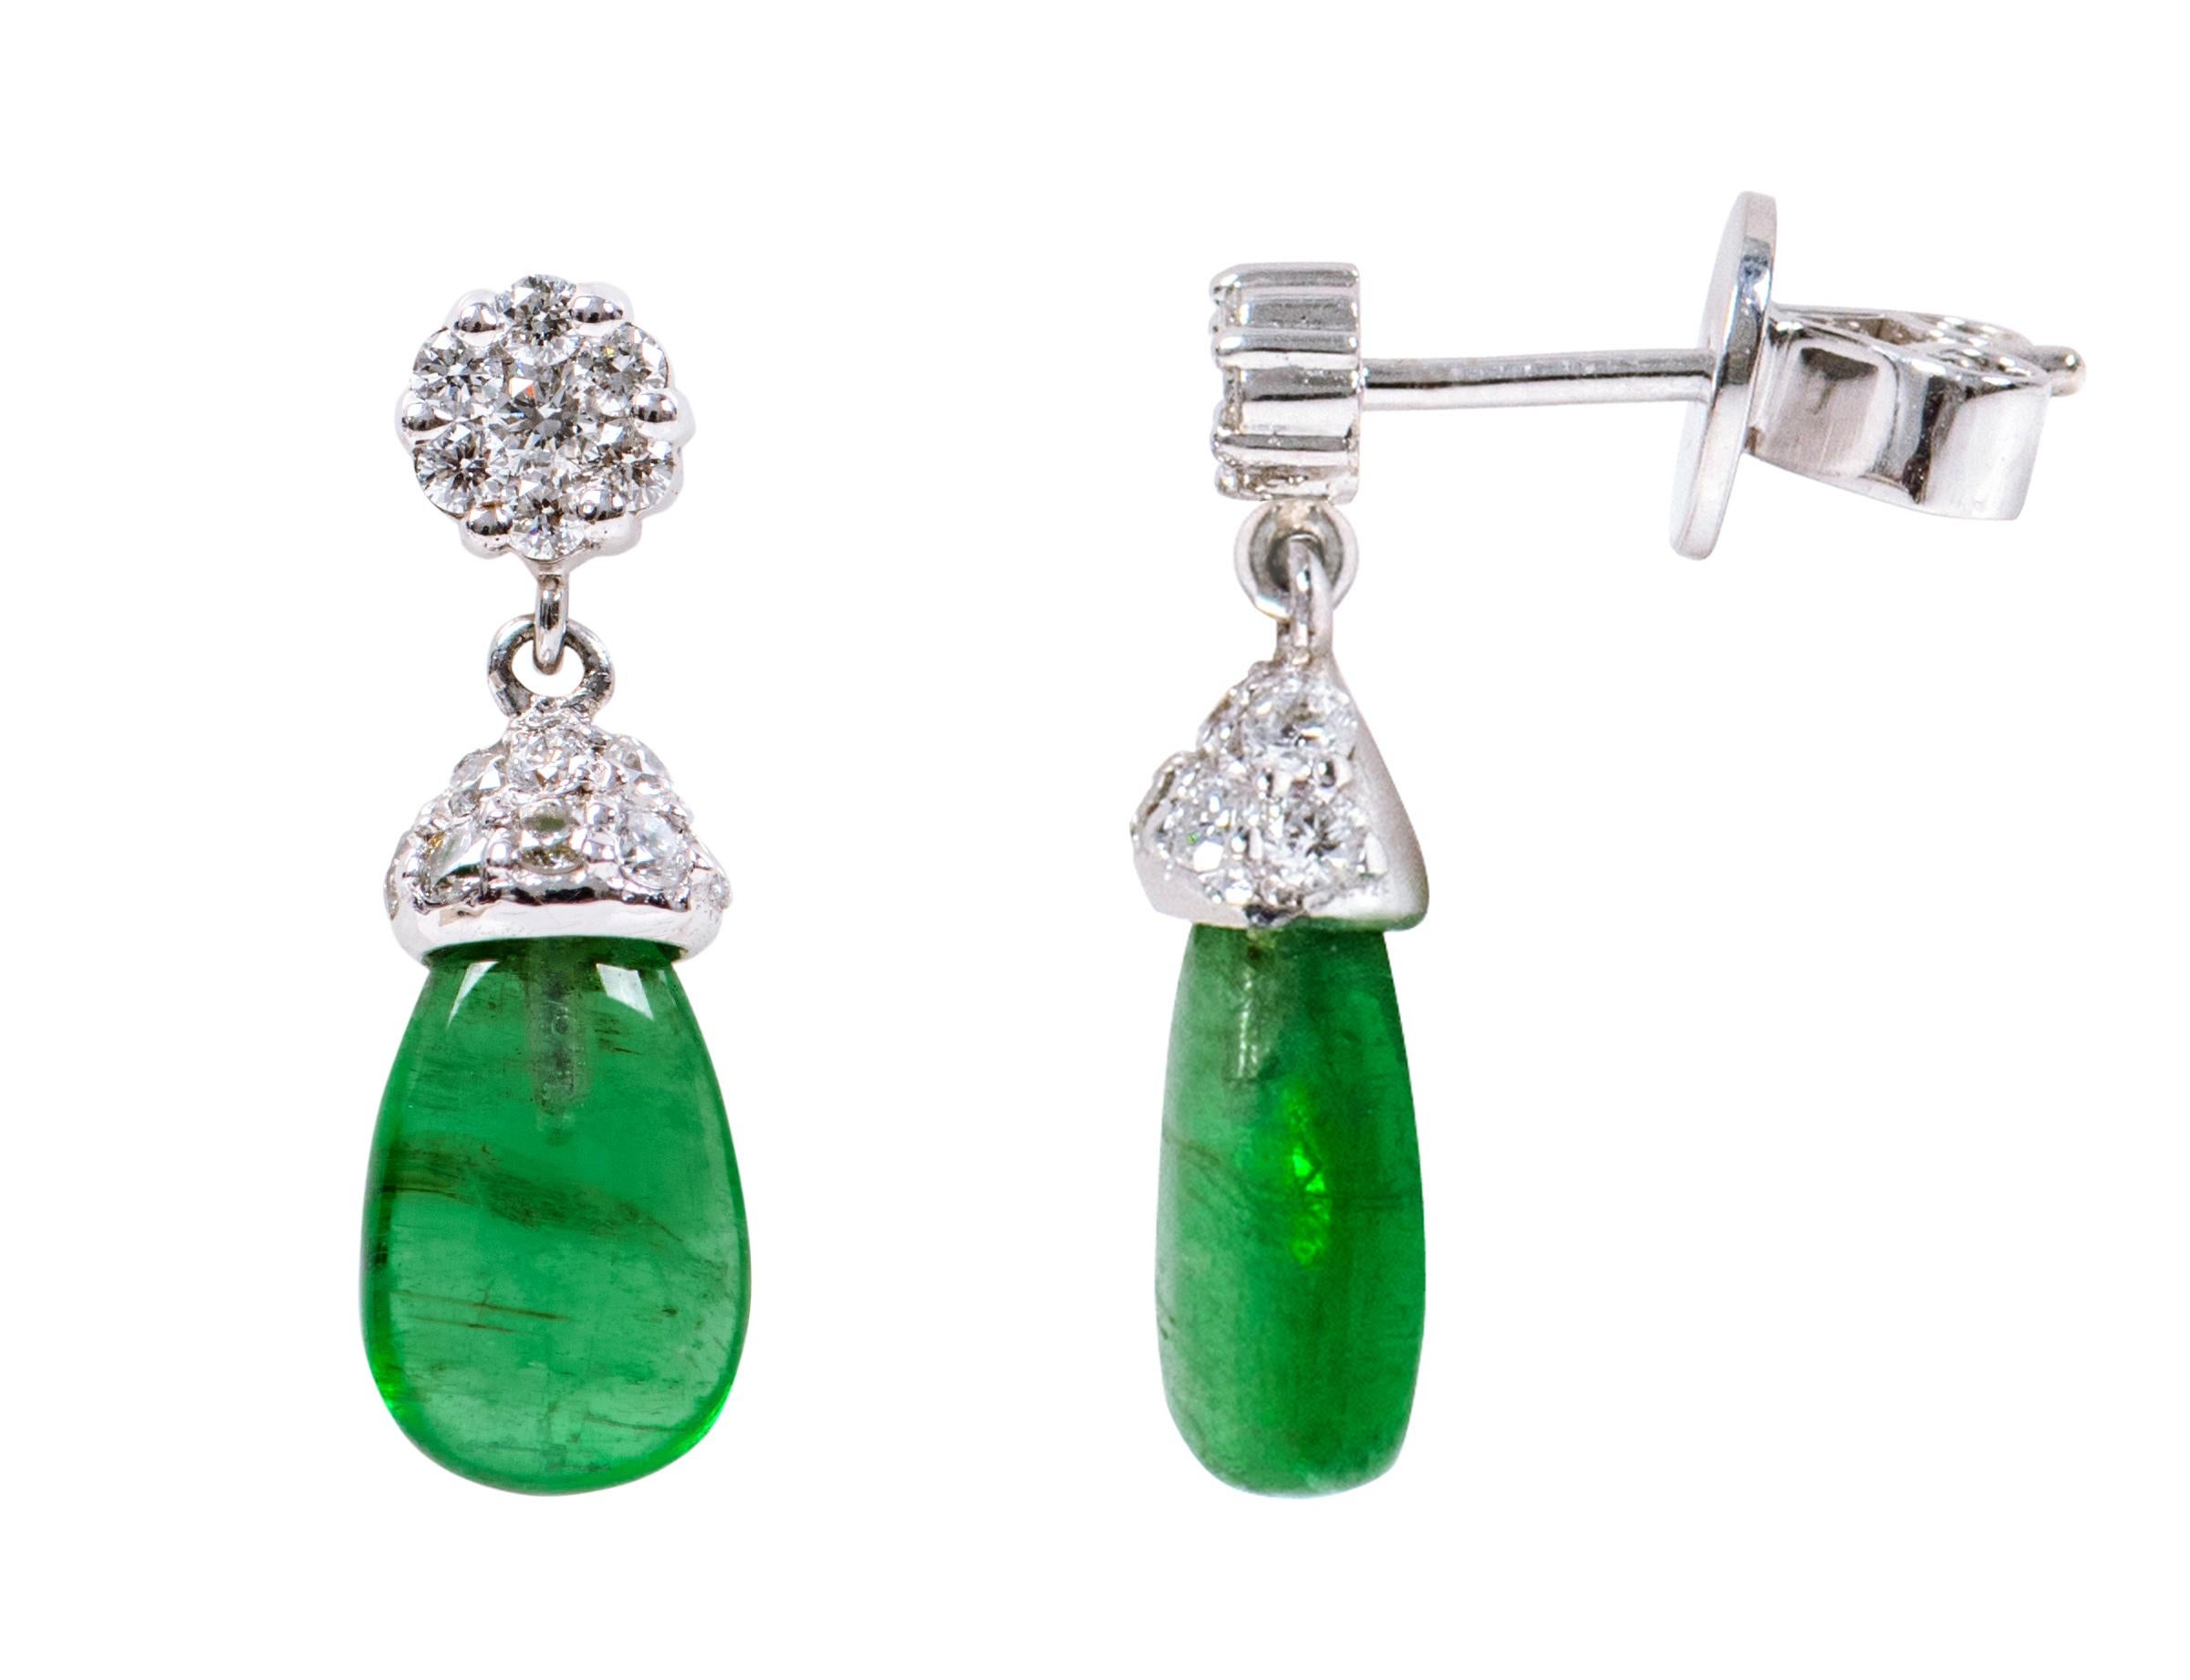 18 Karat White Gold 3.80 Carat Natural Emerald and Diamond Drop Earrings

This magnificent shamrock green emerald and diamond drop earring is fabulous. The closely pave set diamond cap covering the half-drilled transparent emerald teardrop from the